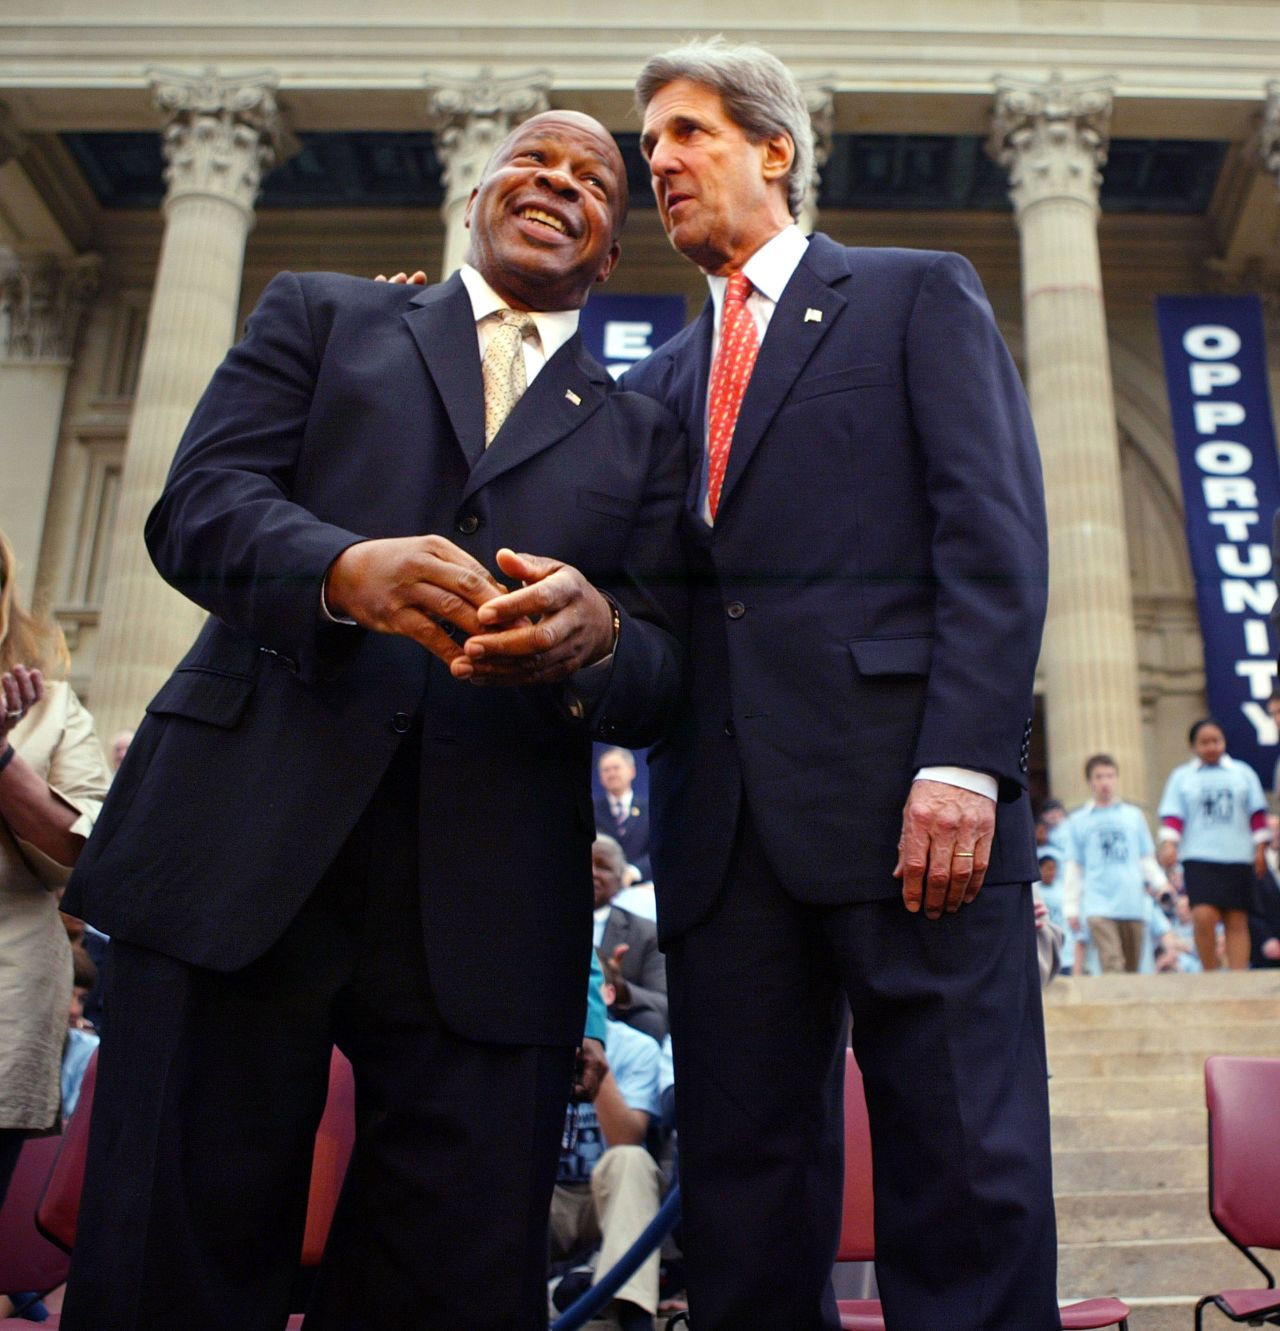 US Sen. John Kerry chats with Cummings during a ceremony in Topeka, Kansas, commemorating the 50th anniversary of Brown v. Board of Education.